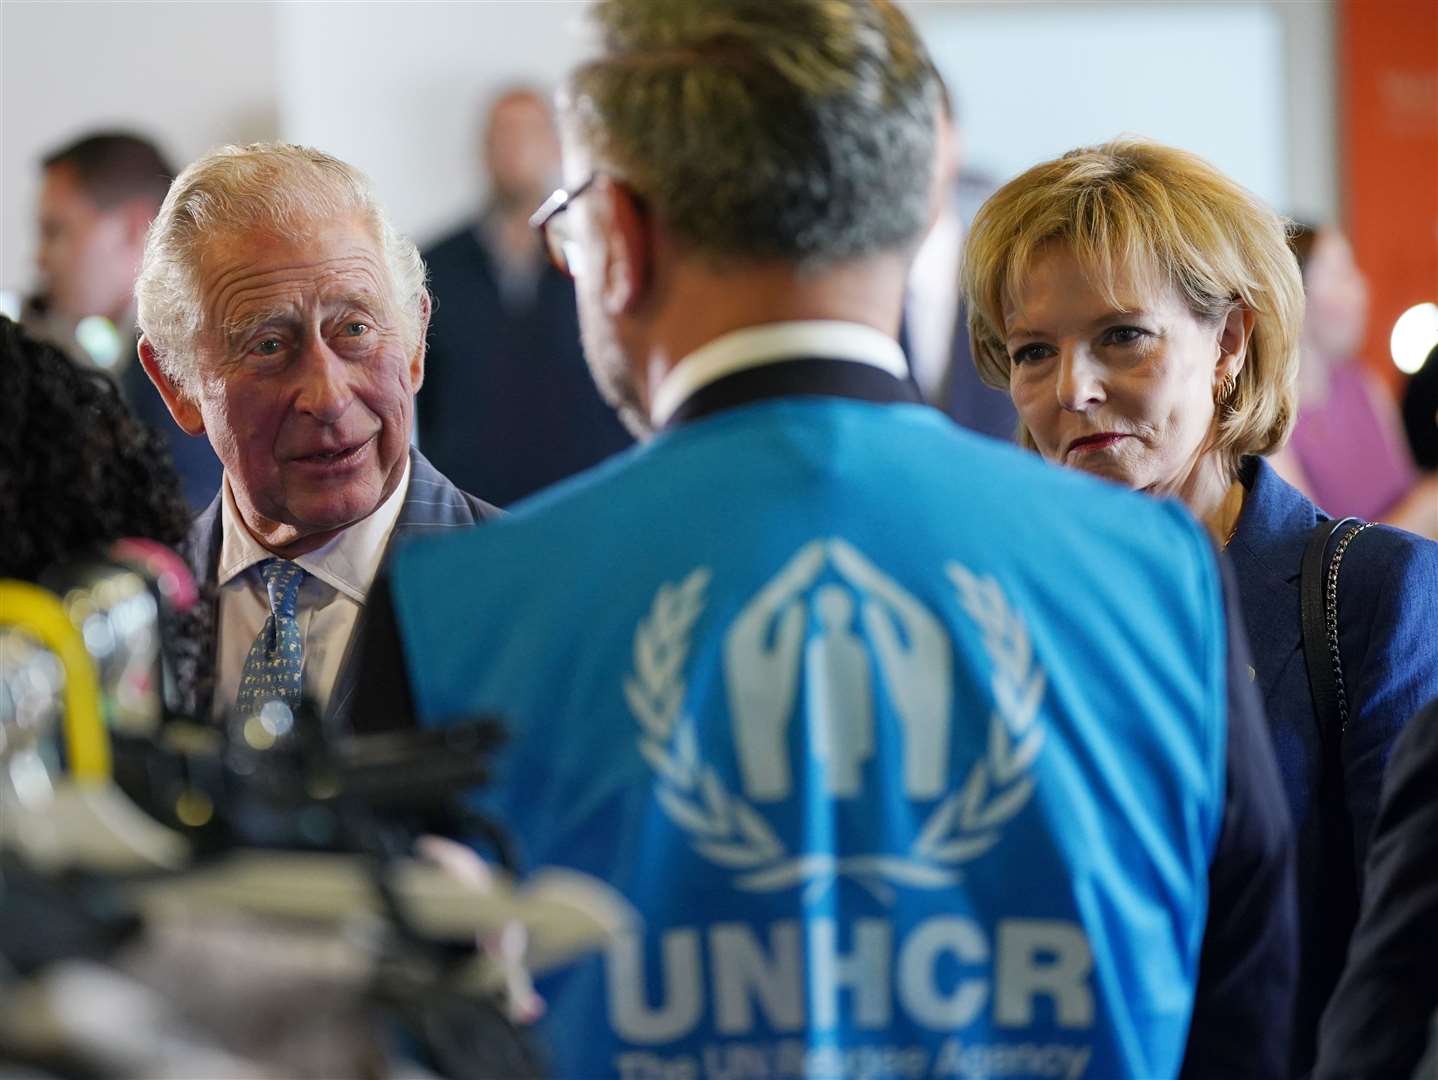 Charles and Margareta at the refugee centre in Bucharest (Yui Mok/PA)